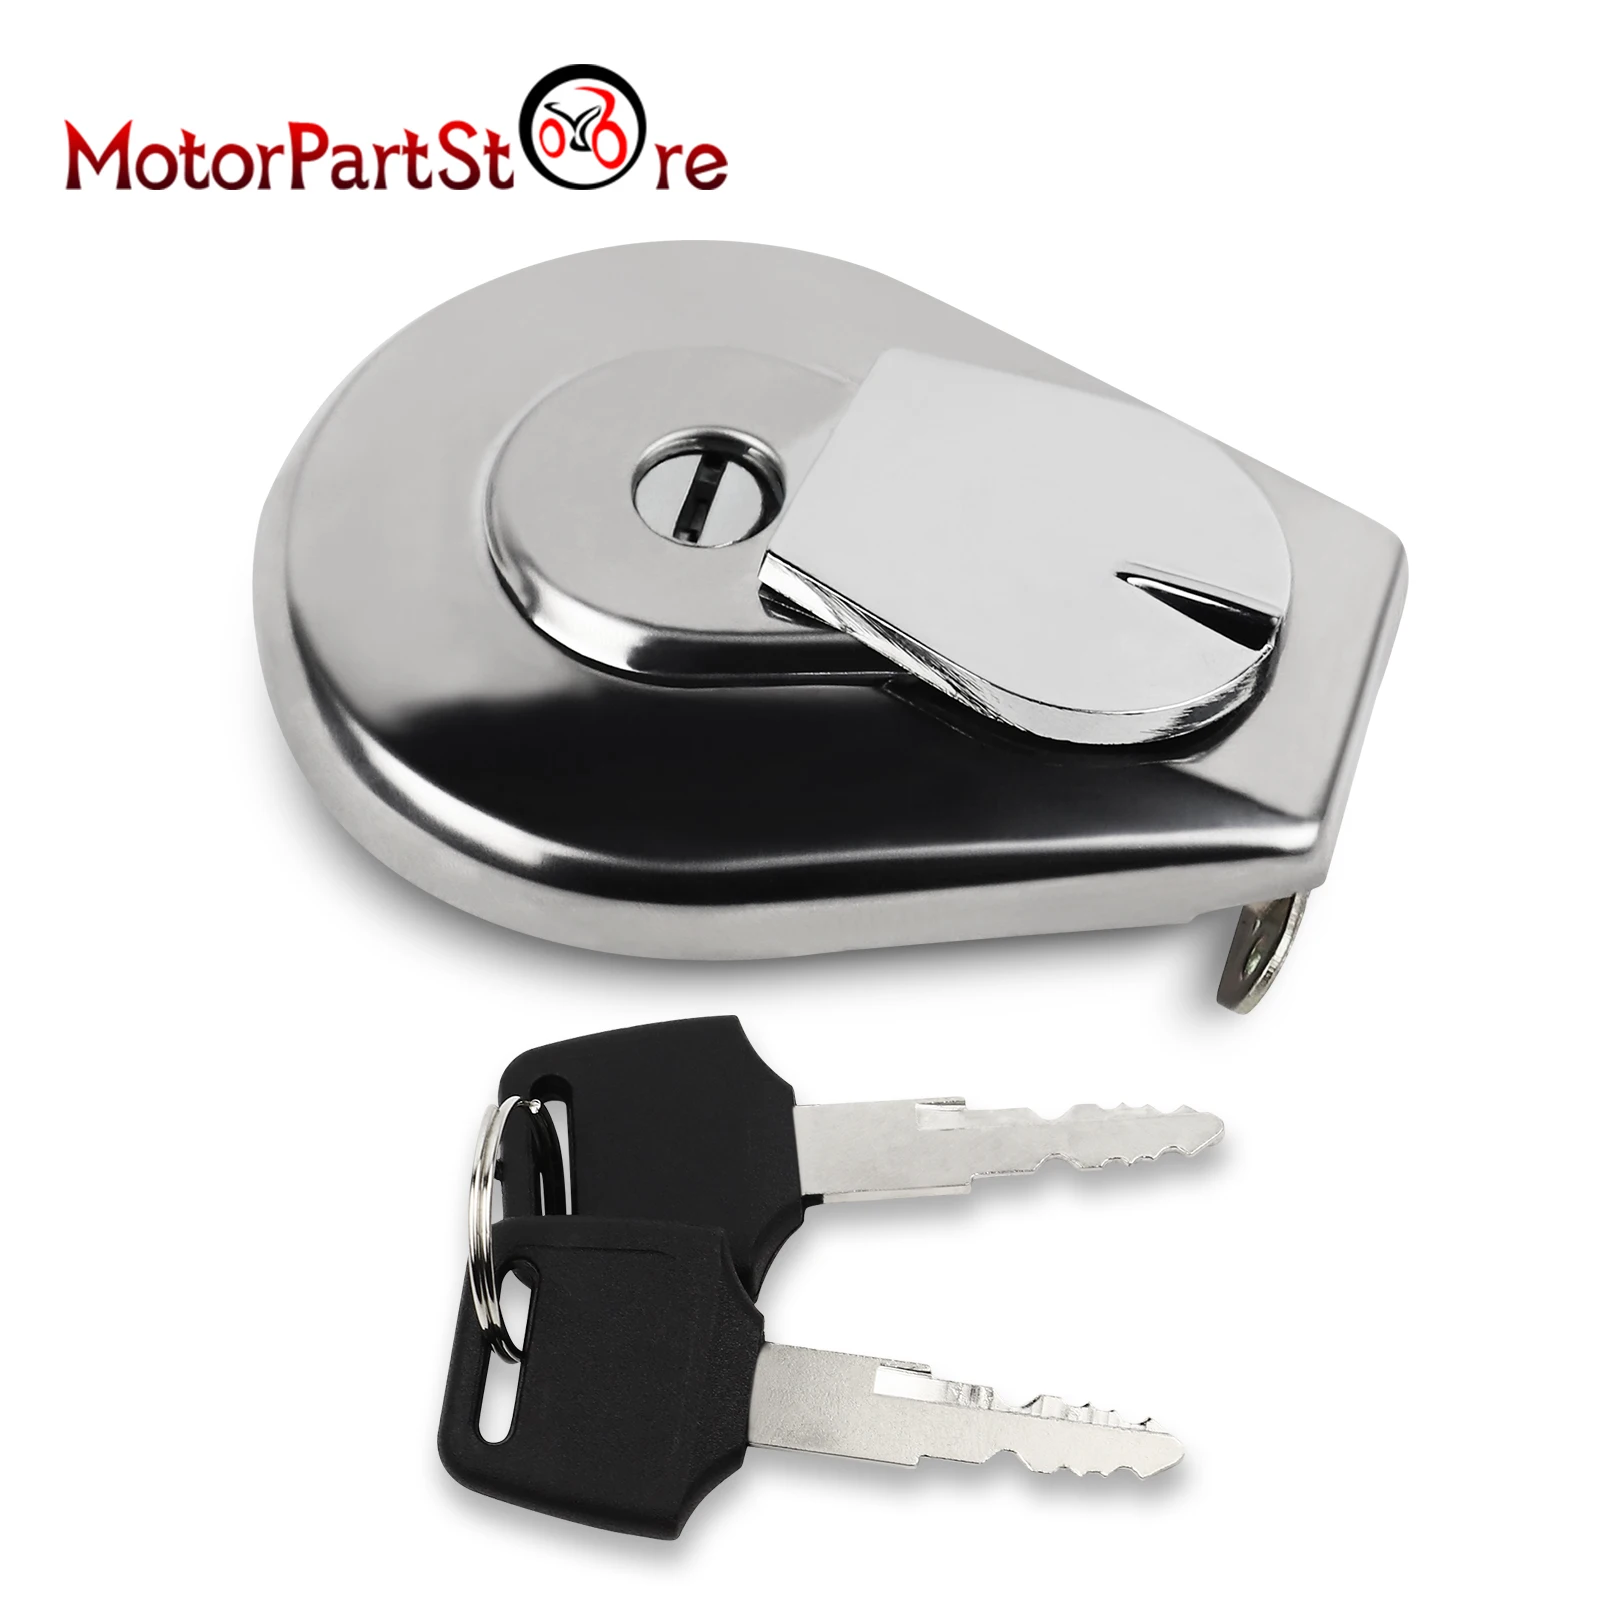 Fuel Gas Tank Cap Lock Cover with Keys for Honda VF750C VF750 VF500C VT500C VT700C VT800C CB650SC CB250 CB750 VF1100C GL1500